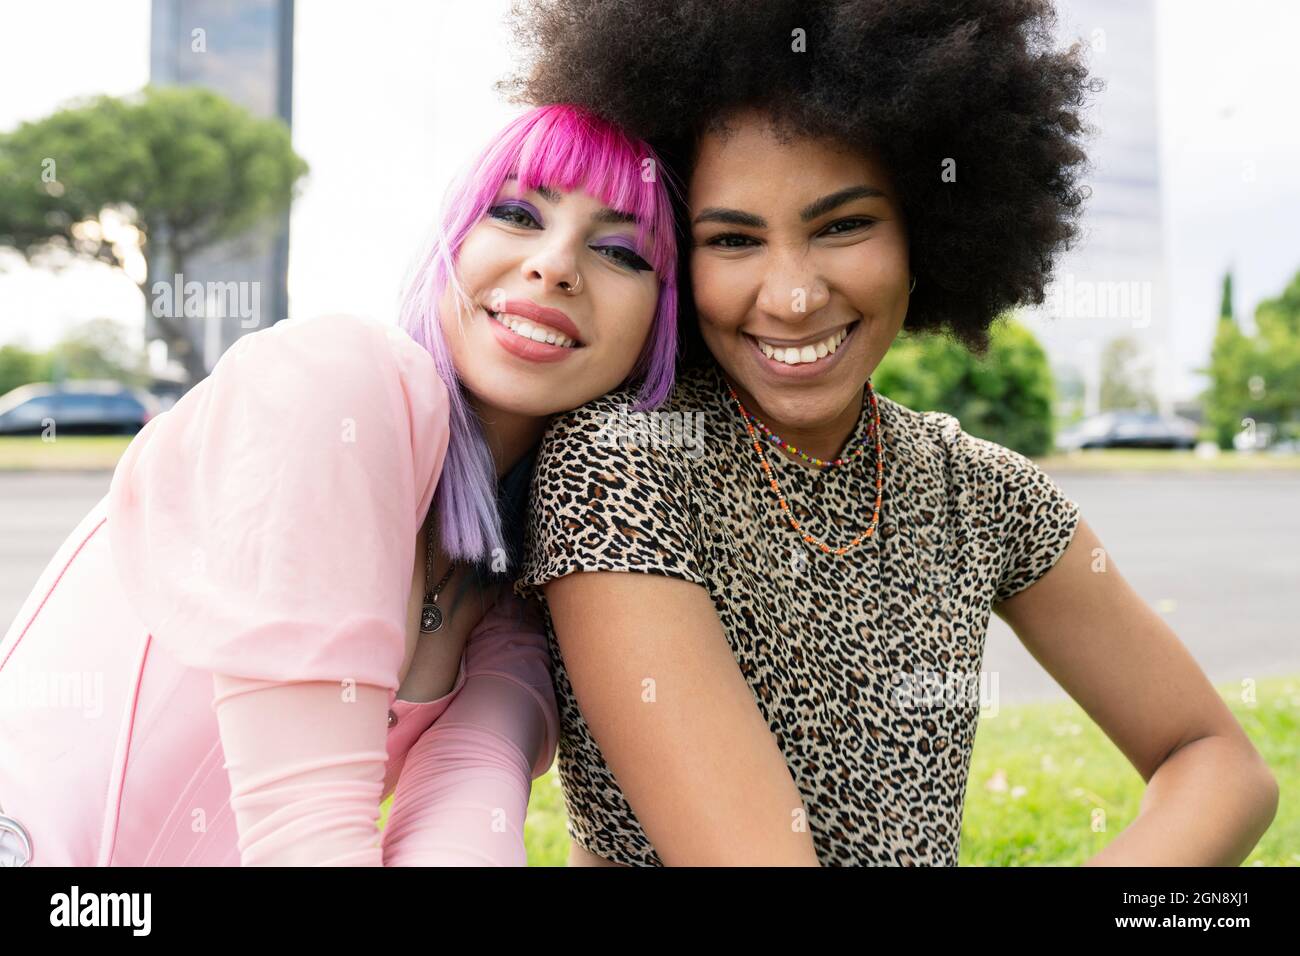 Woman with dyed hair leaning on Afro female friend at park Stock Photo